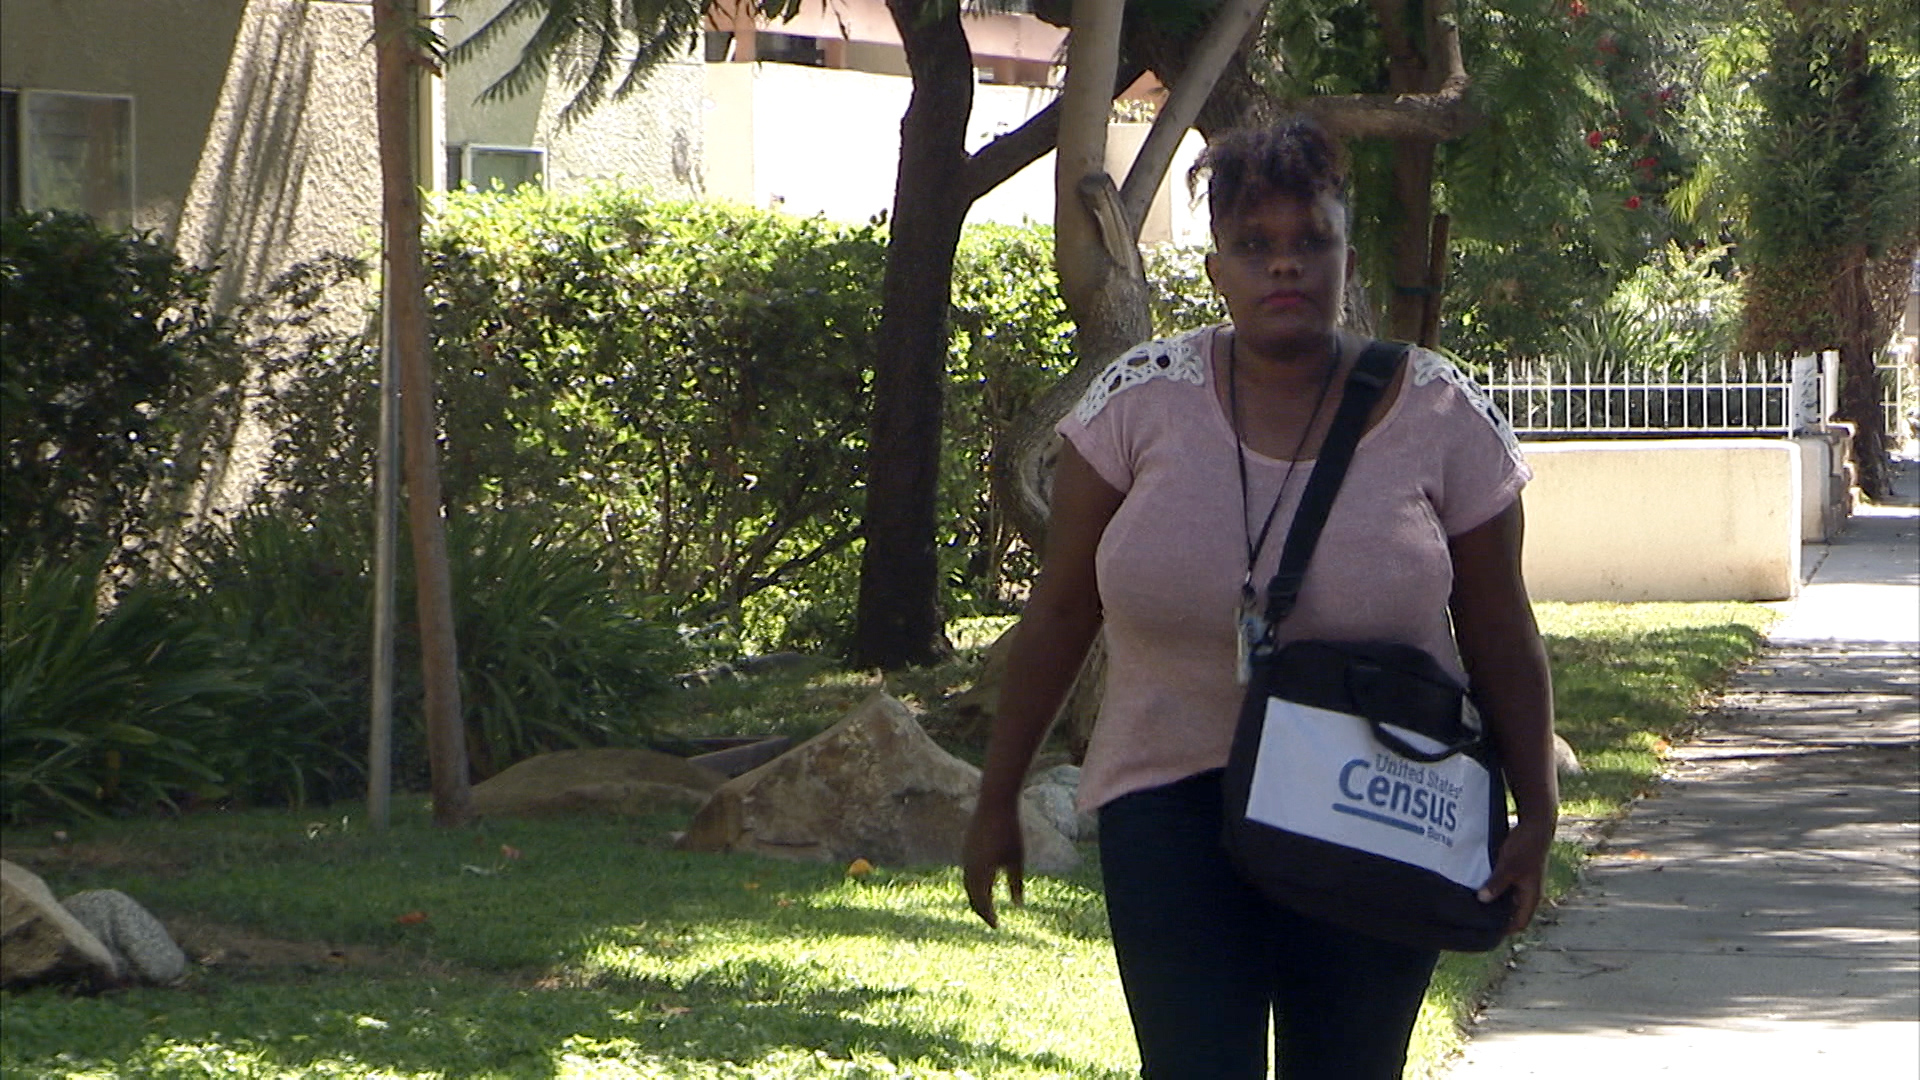 A woman walking next to a green lawn with a Census bag.